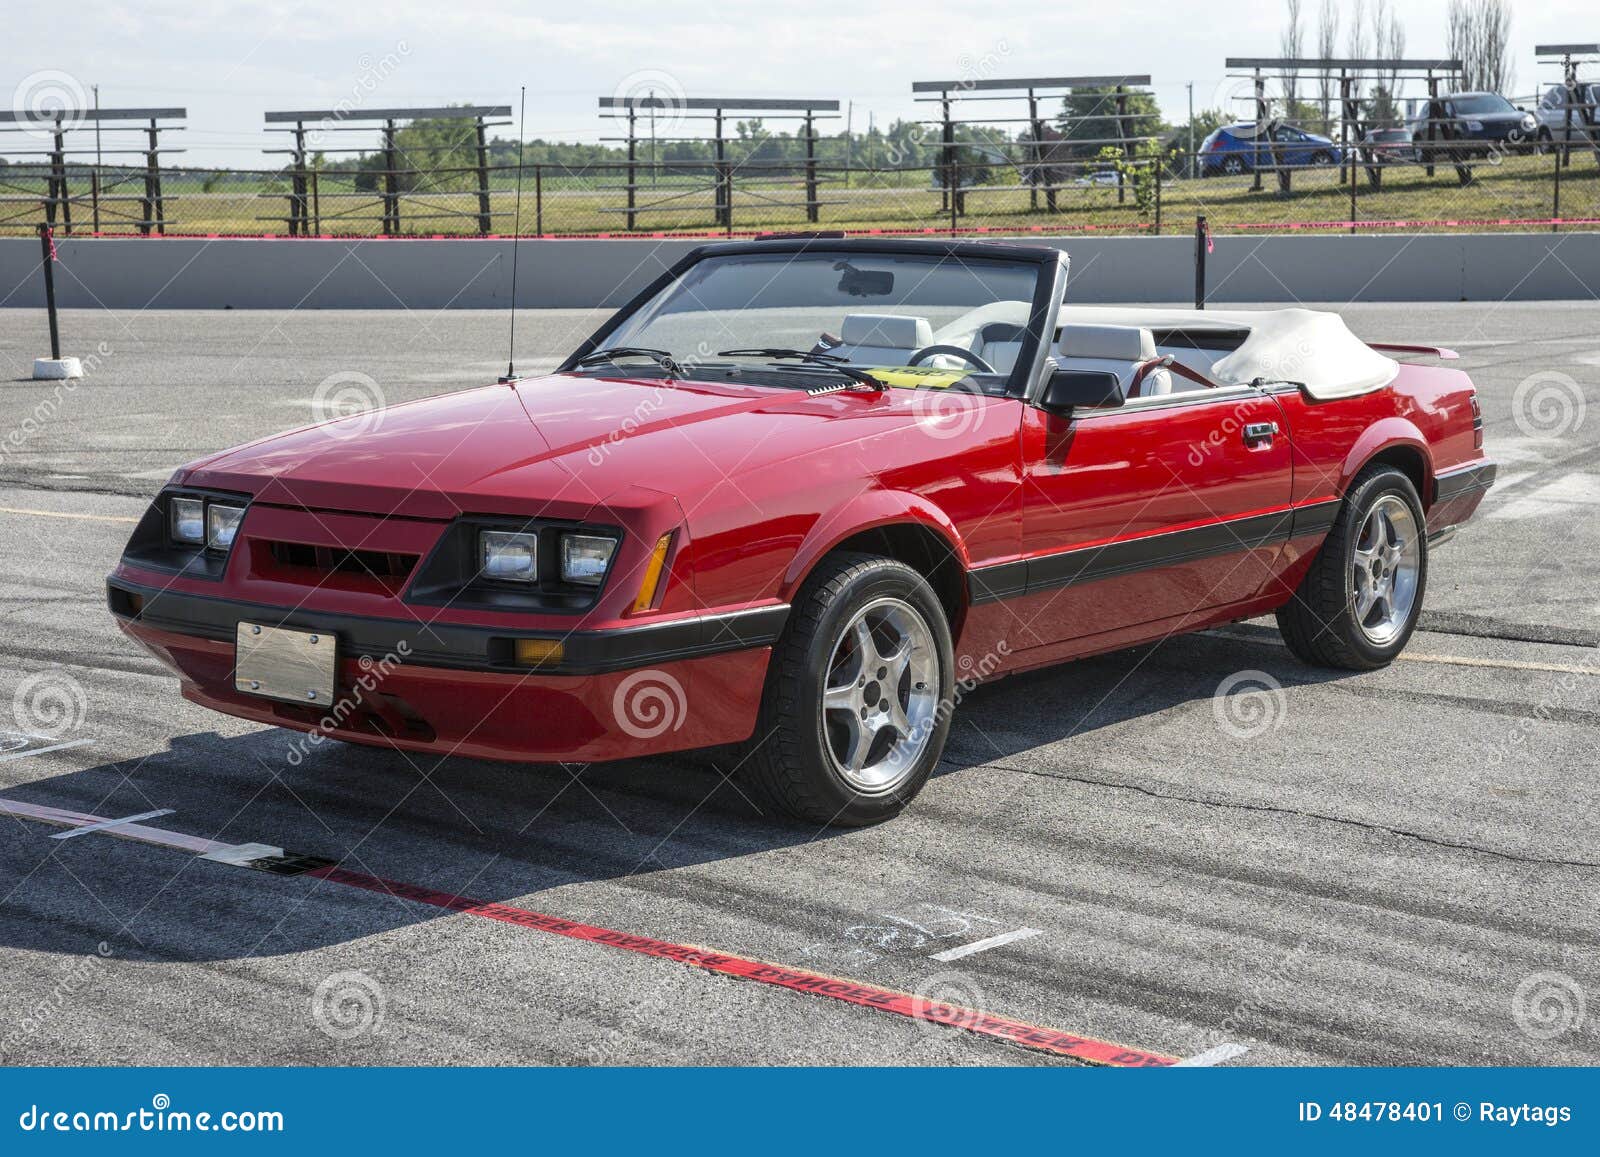 Ford Mustang Convertible Stock Image Image Of Generation